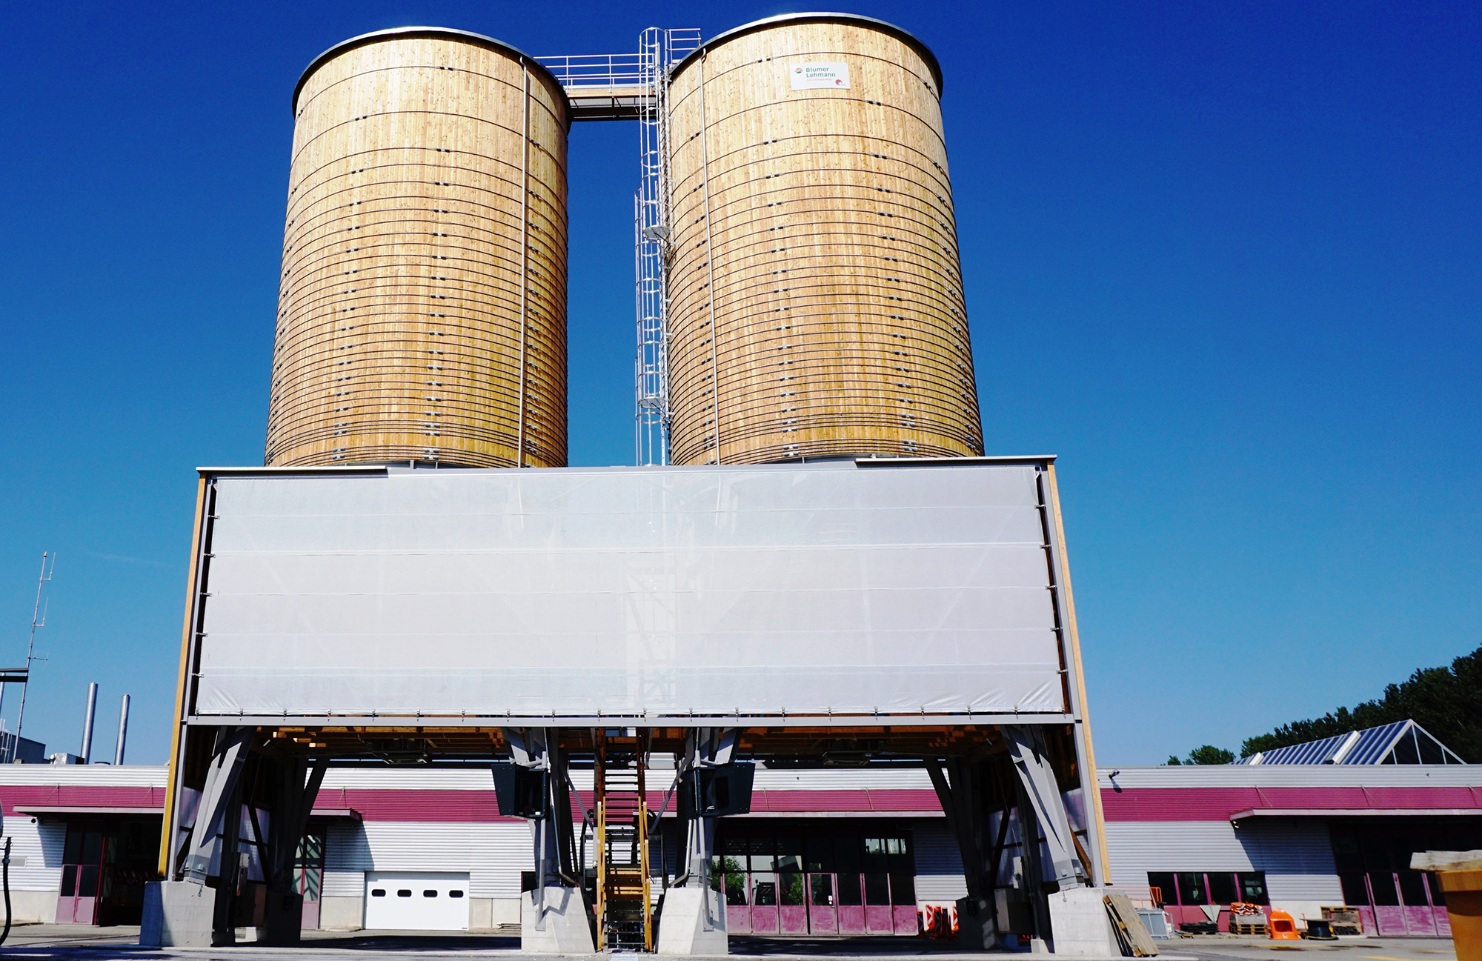 Switzerland's largest round silo facility for gritting materials in Domdidier with a volume of 1200m3